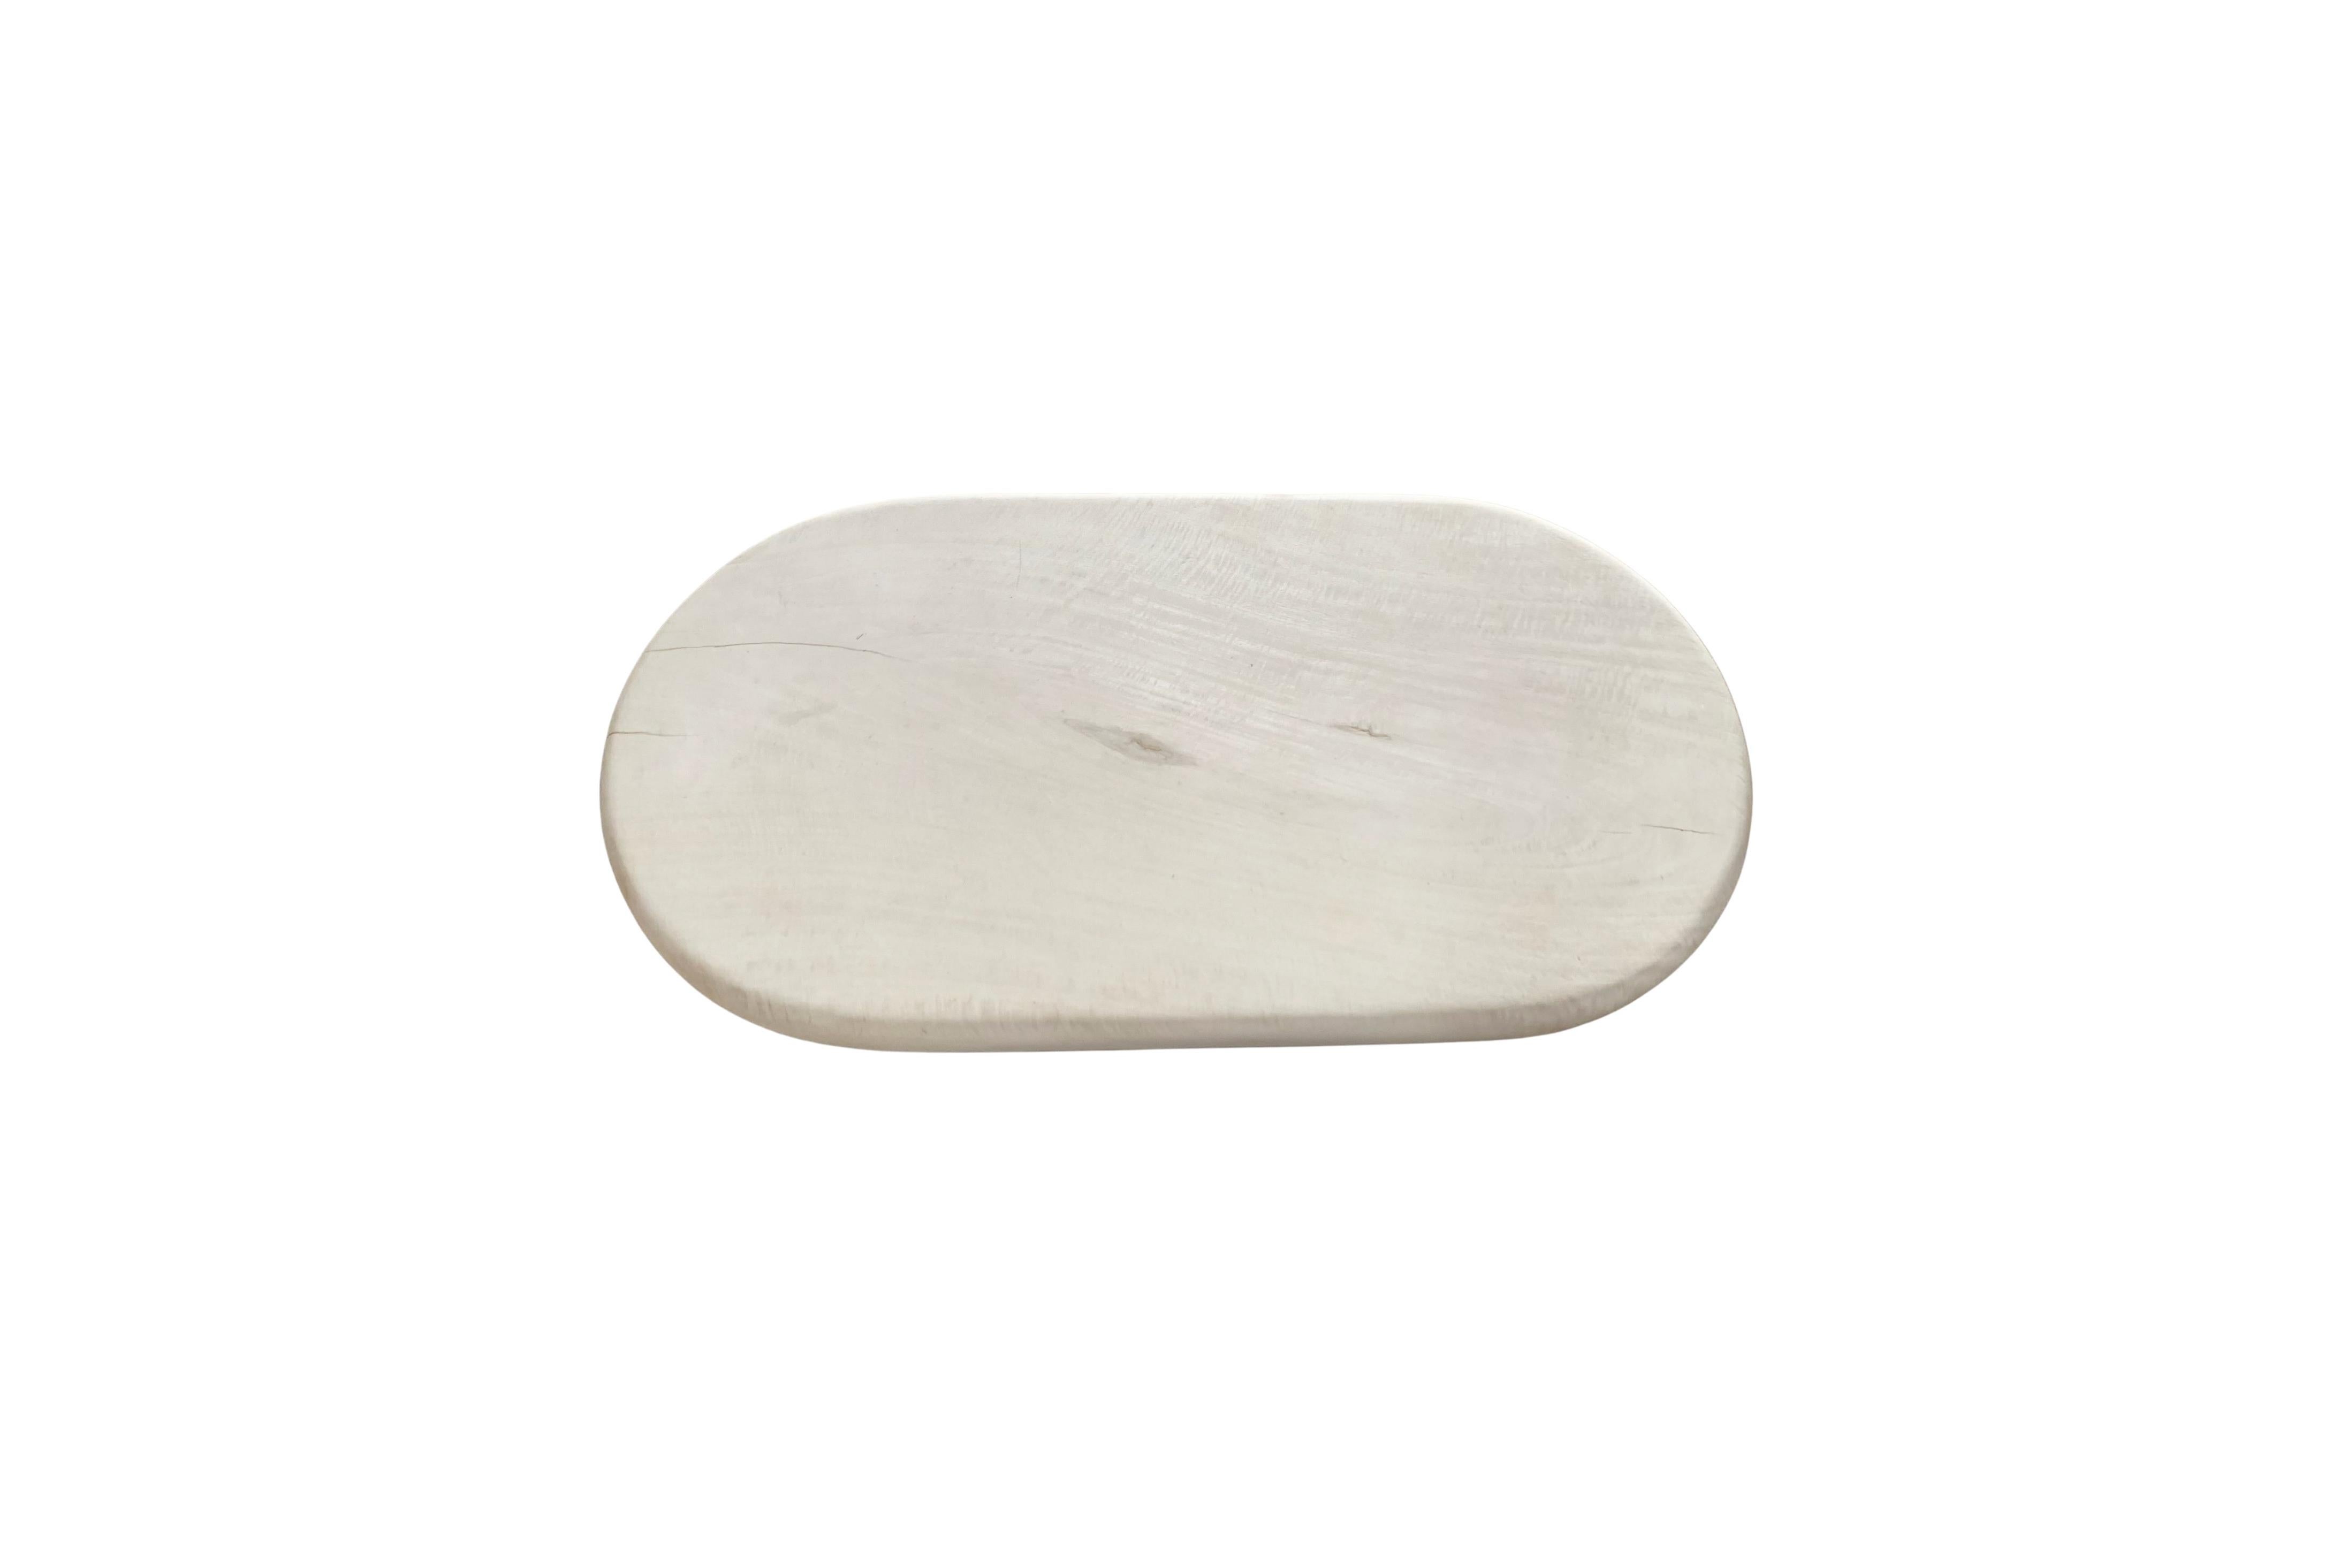 Hand-Crafted Round Table crafted from Mango Wood with Bleached Finish